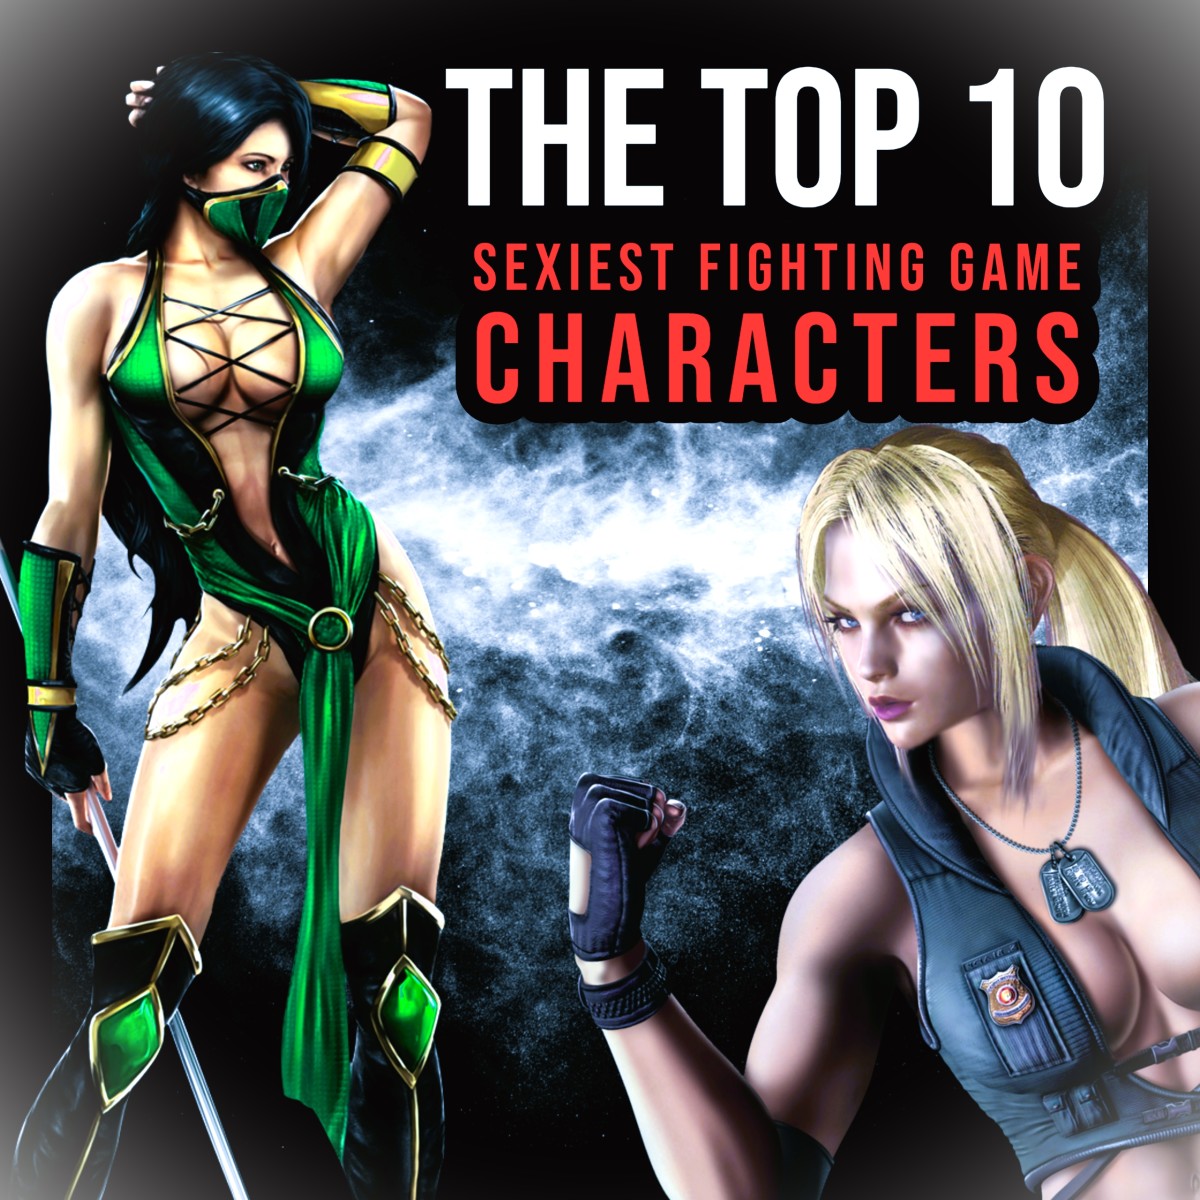 From Christie Monteiro to Ivy Valentine, this article ranks the 10 sexiest fighting game characters of all time!